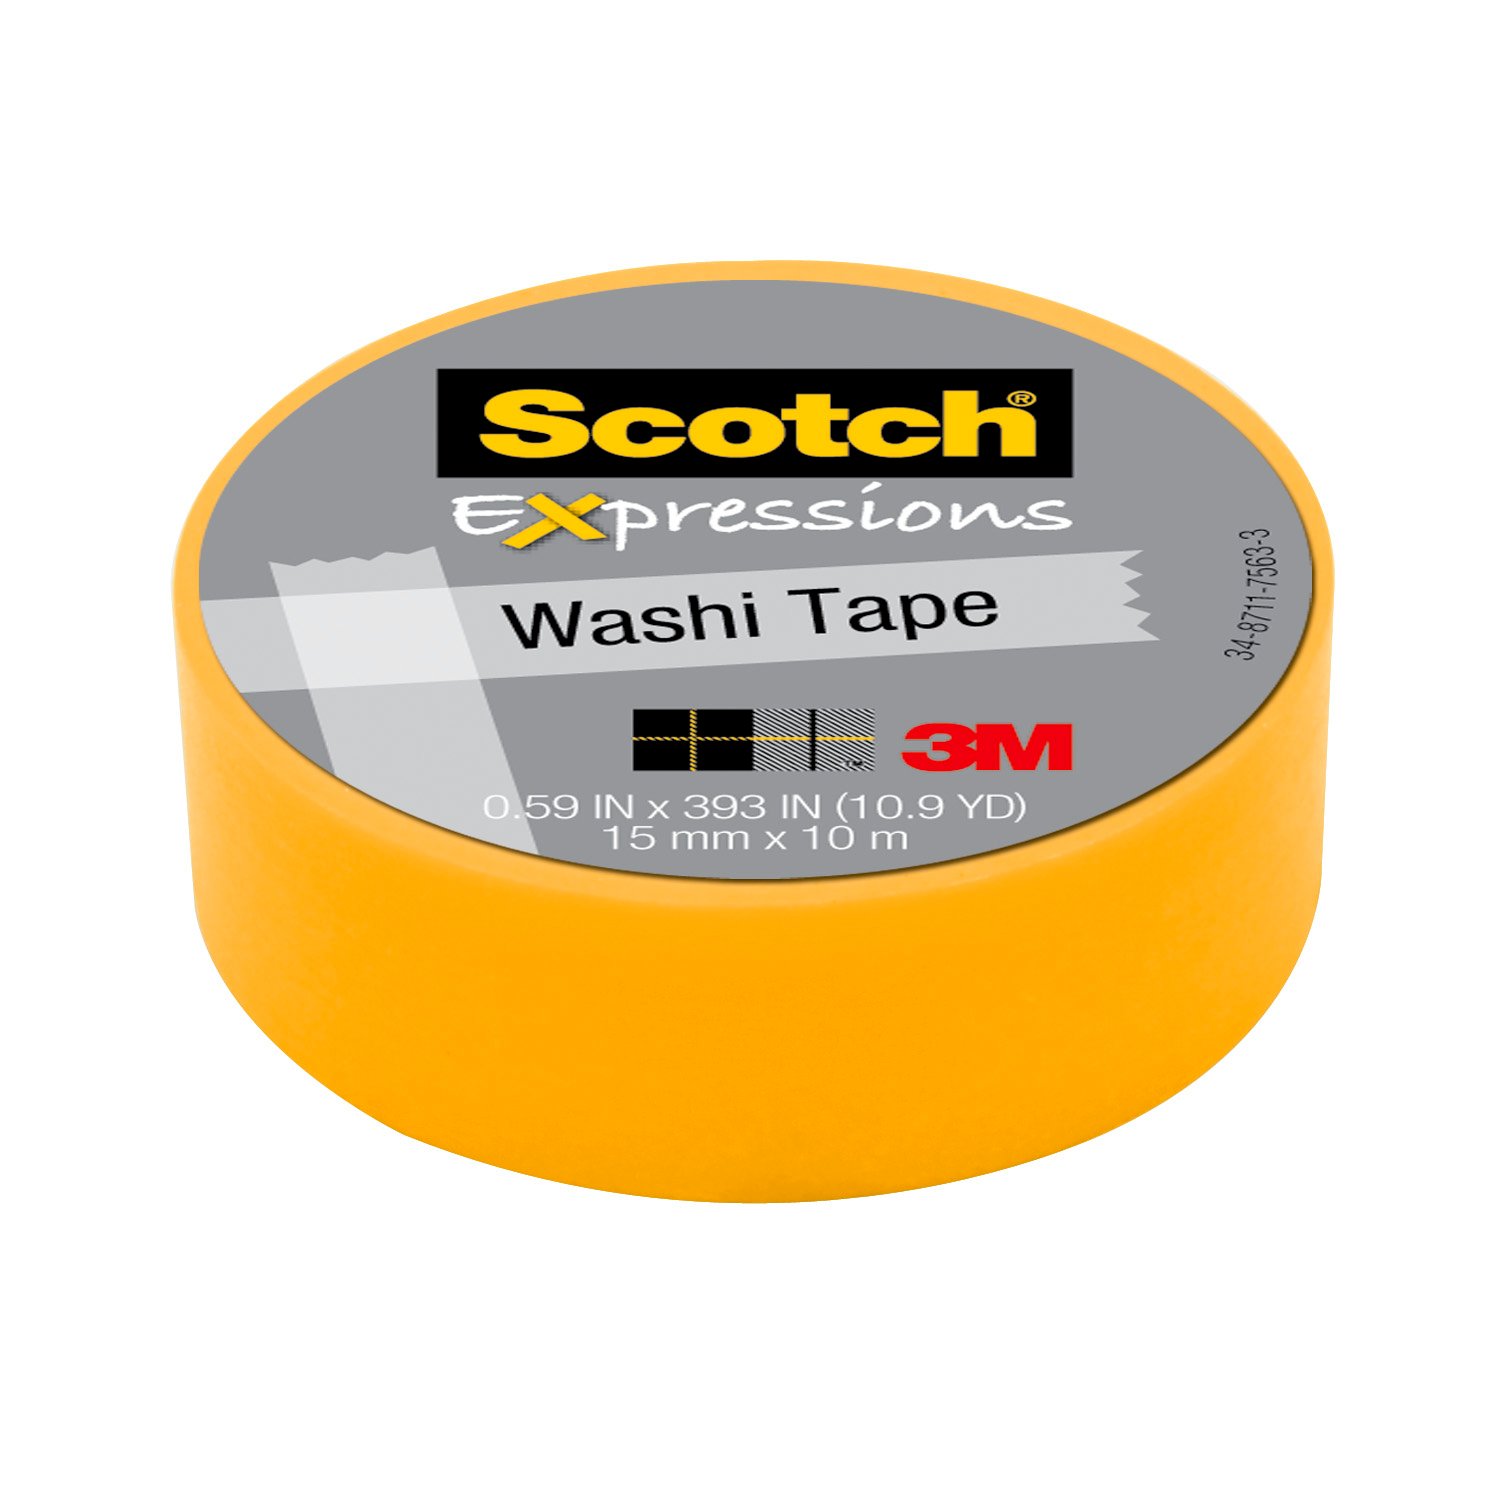 7100019519 - Scotch Expressions Washi Tape C314-YEL, .59 in x 393 in (15 mm x 10 m)
Yellow